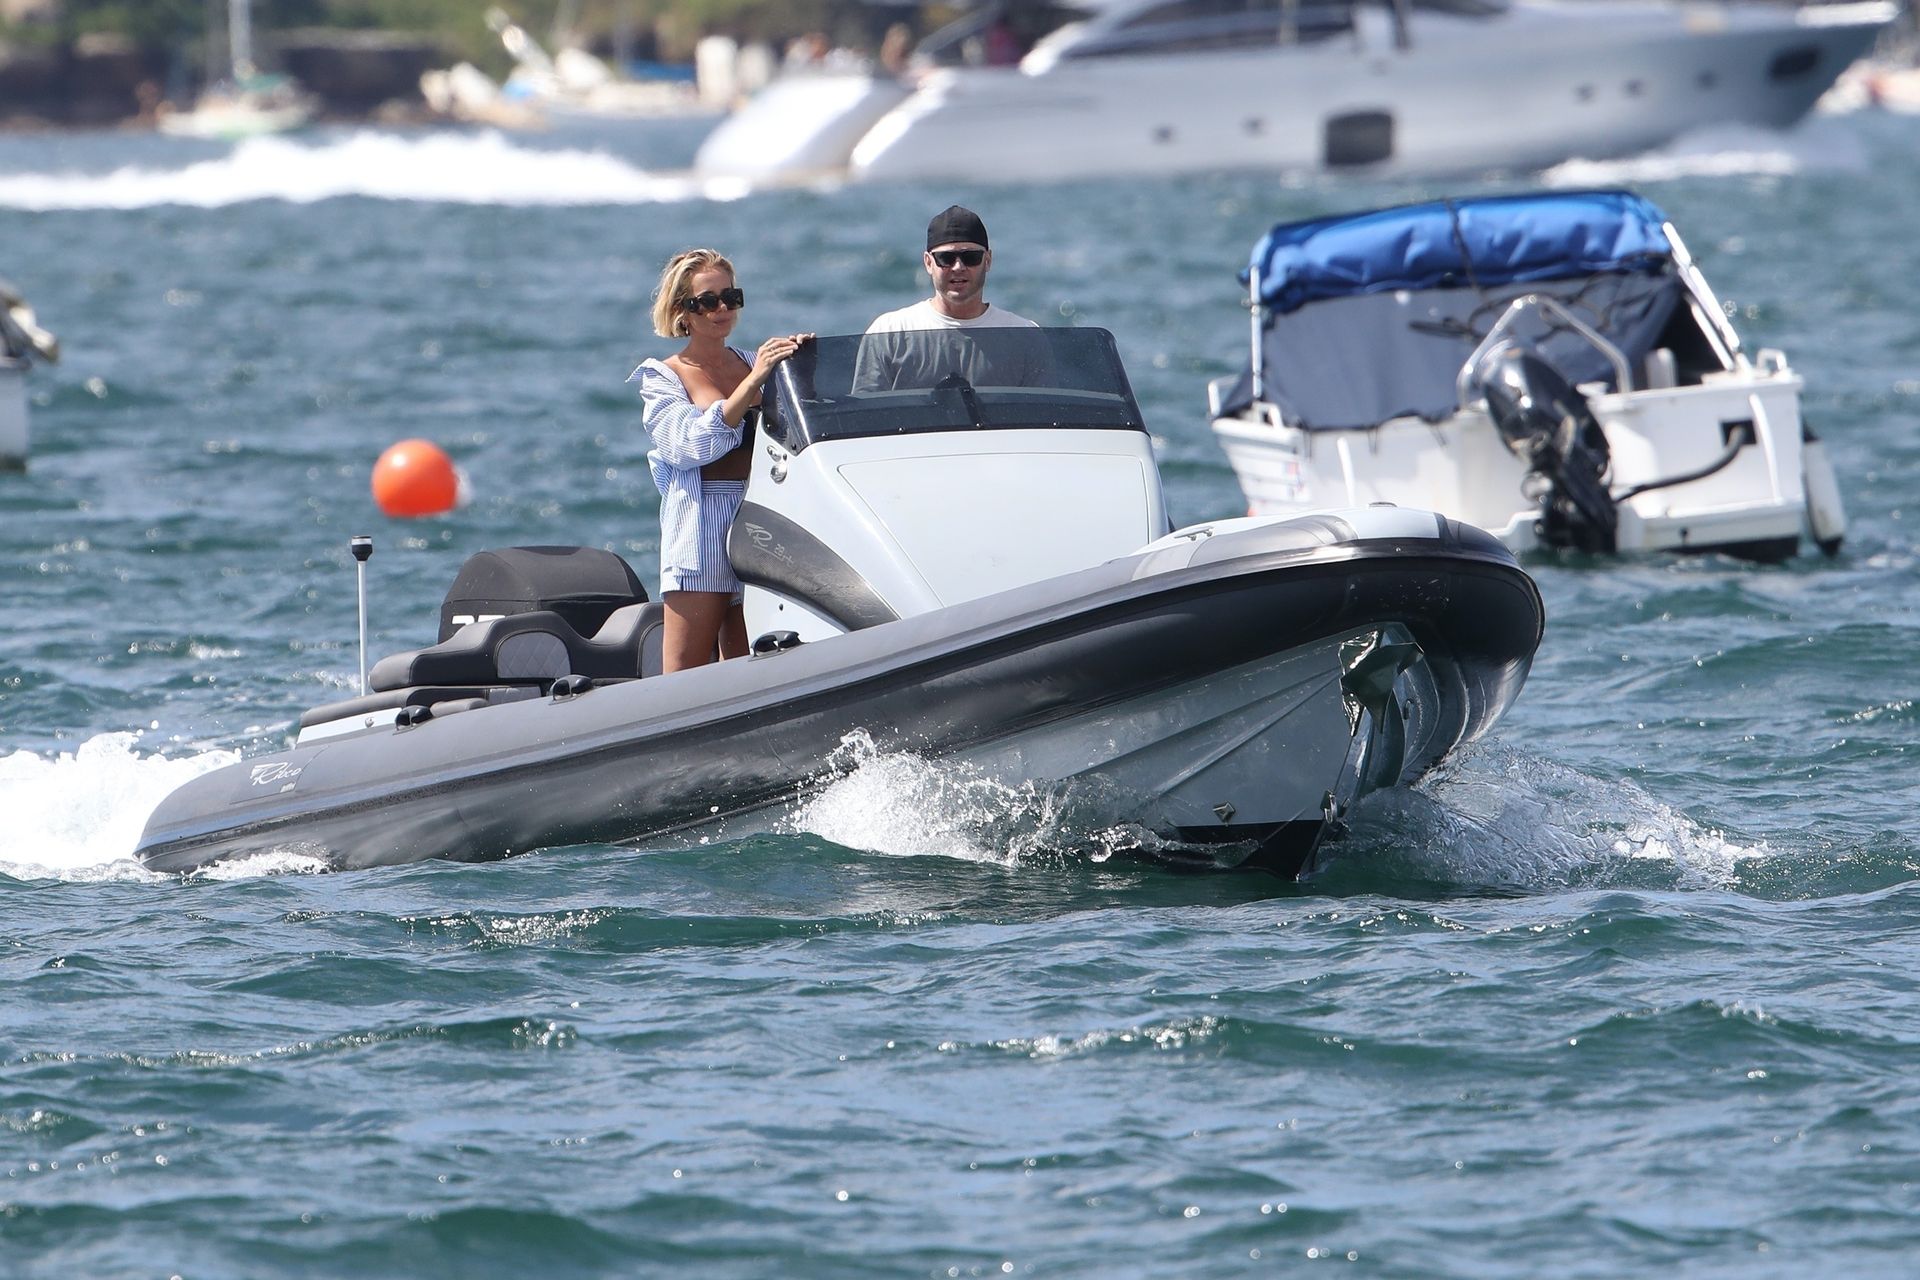 Michael Clarke & Pip Edwards Appeared to be All Smiles while Boating Around Sydney (50 Photos)